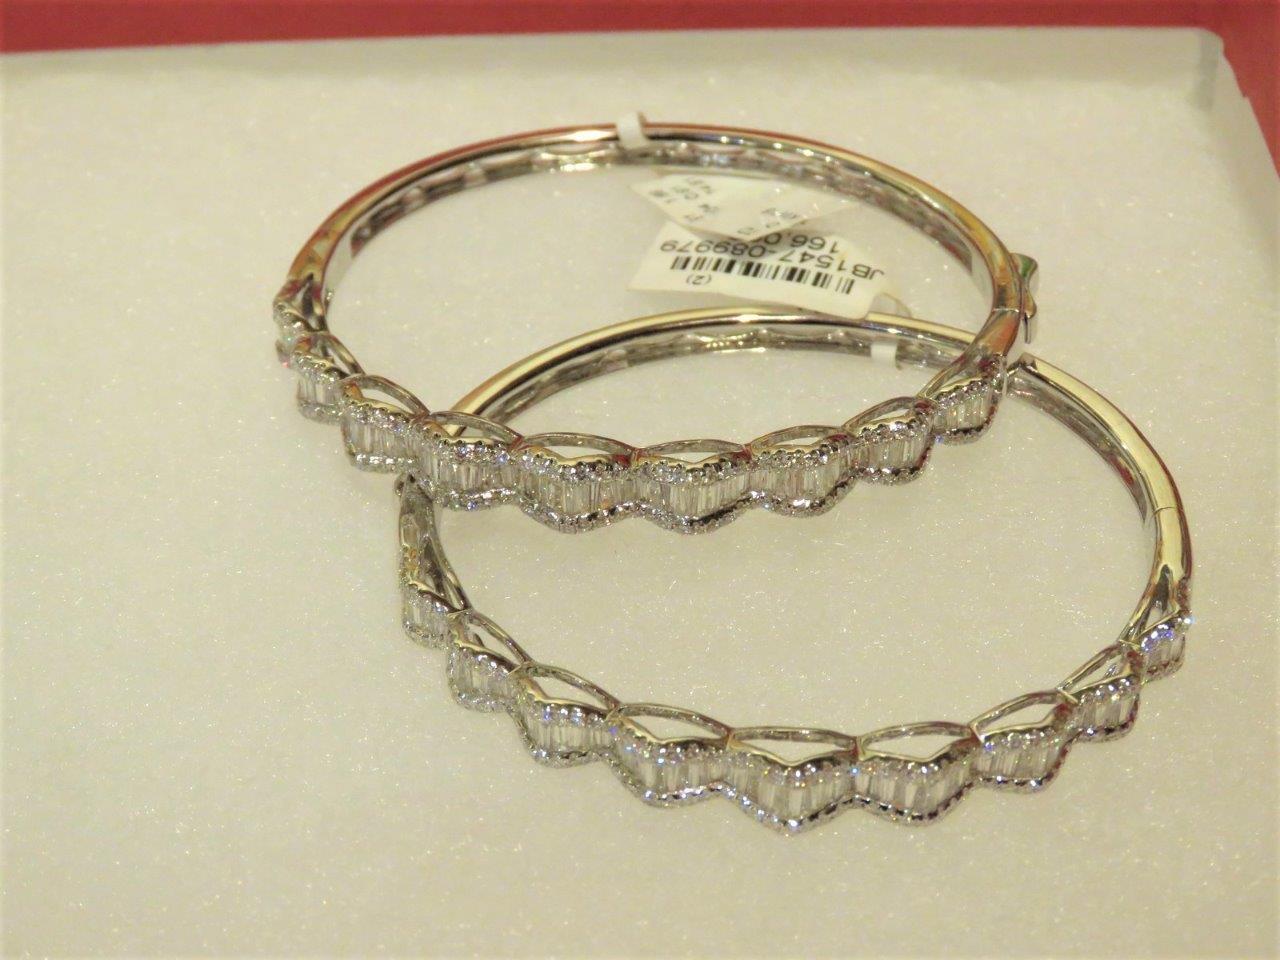 The Following Items we are offering are these Beautiful Rare Important 18KT White Gold Brilliant Pair of Fancy Cut Diamond Bangle Bracelets. Bangles are comprised of Magnificent Rare Gorgeous Natural Rare Fancy Glittering Diamonds!!! T.C.W. Approx